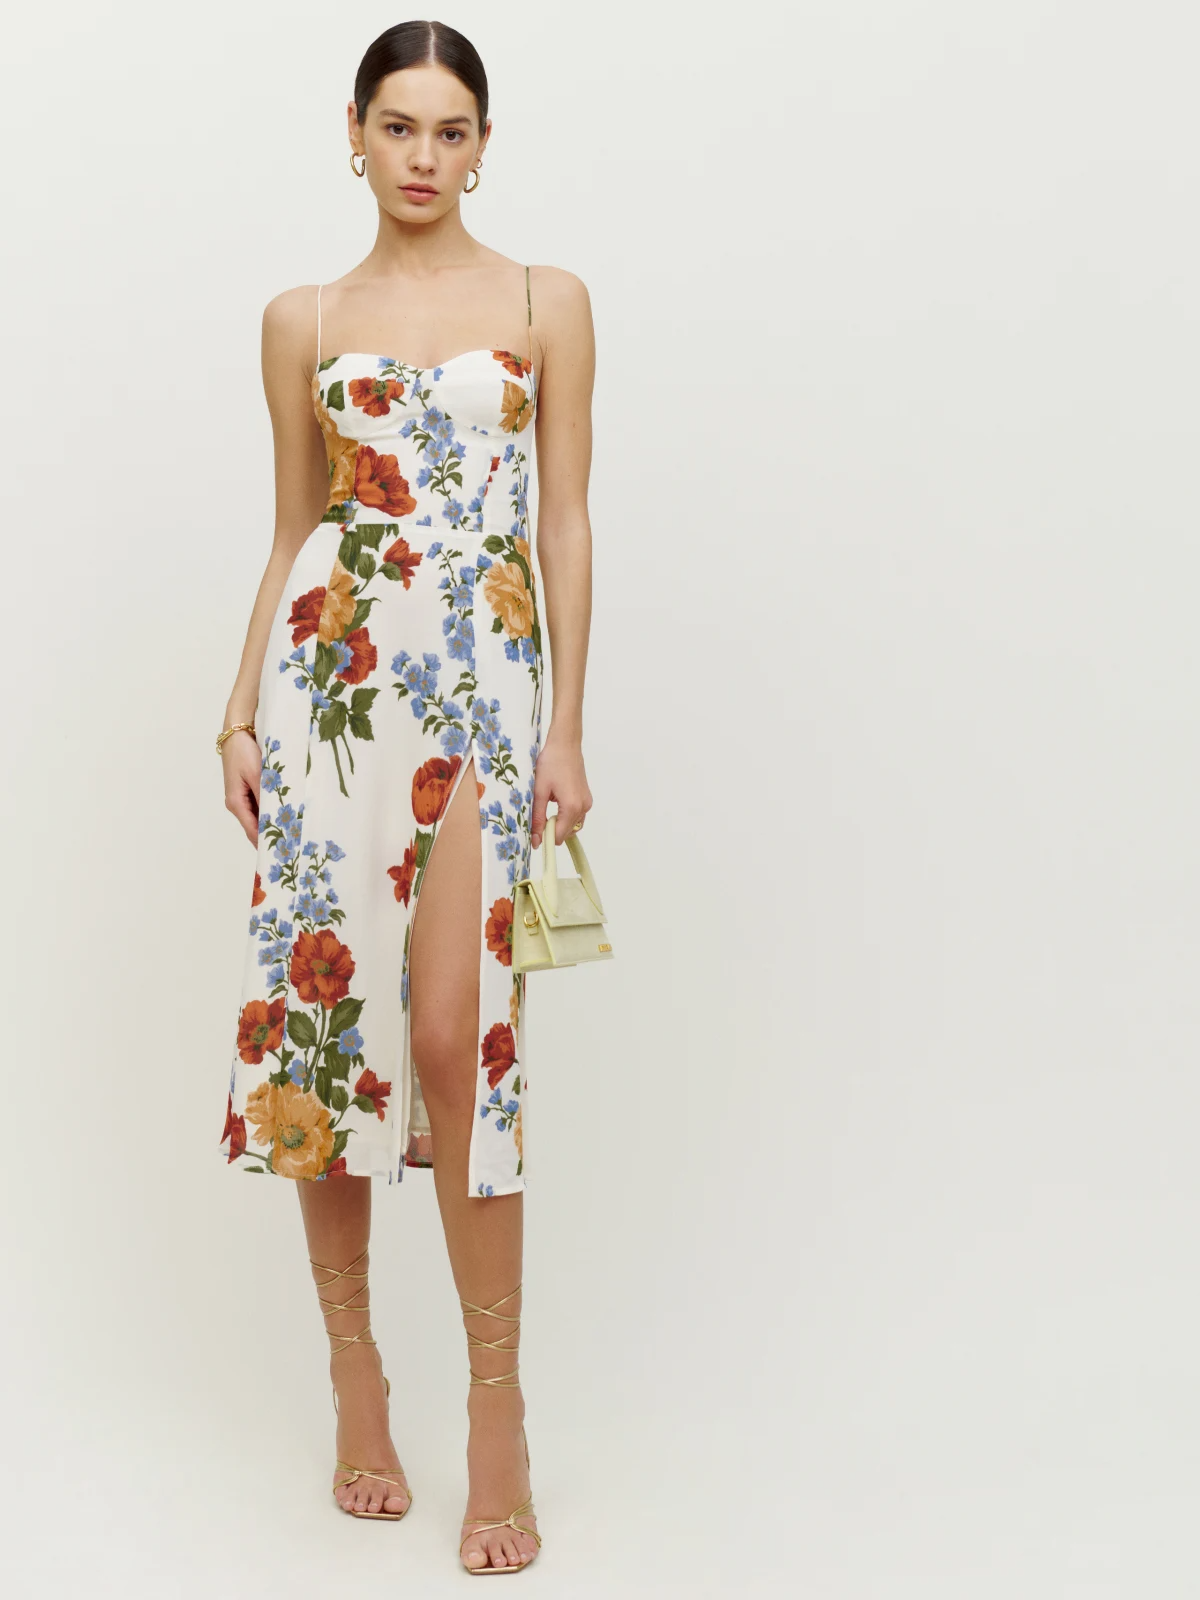 floral print dress for engagement party